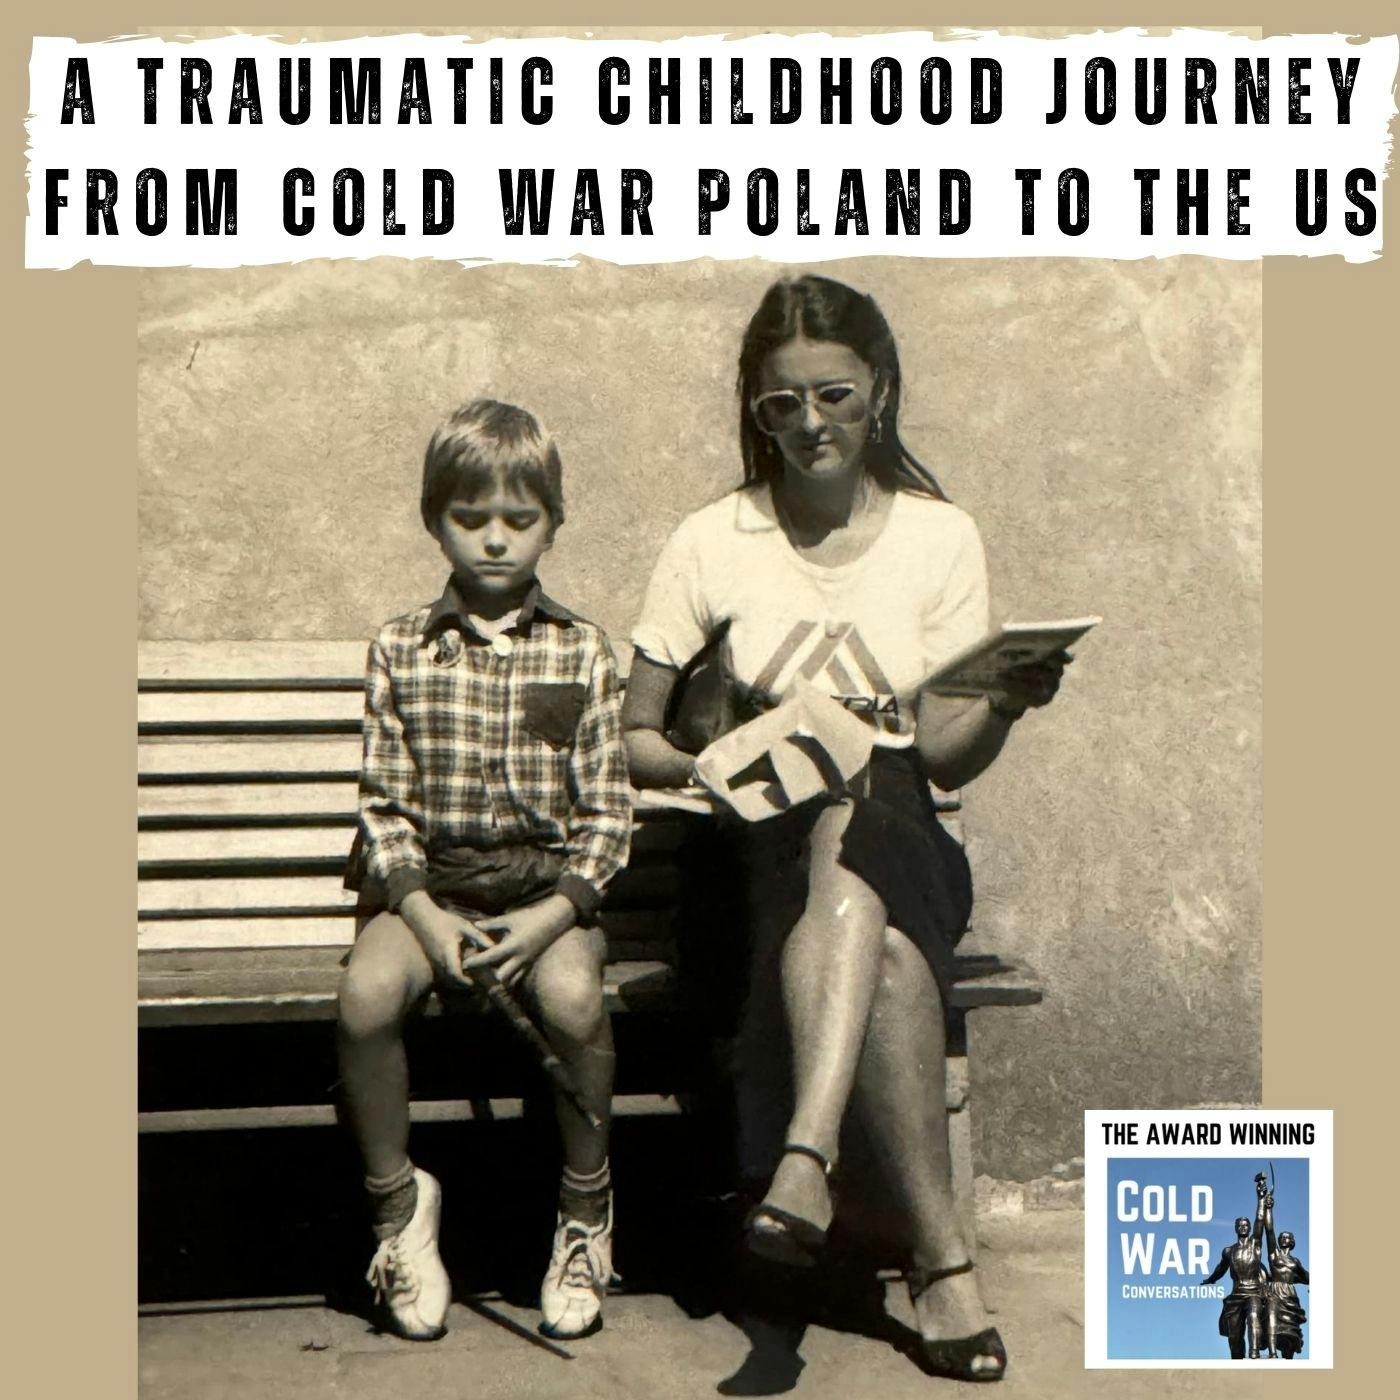 A traumatic childhood journey from Cold War Poland to the United States (331)